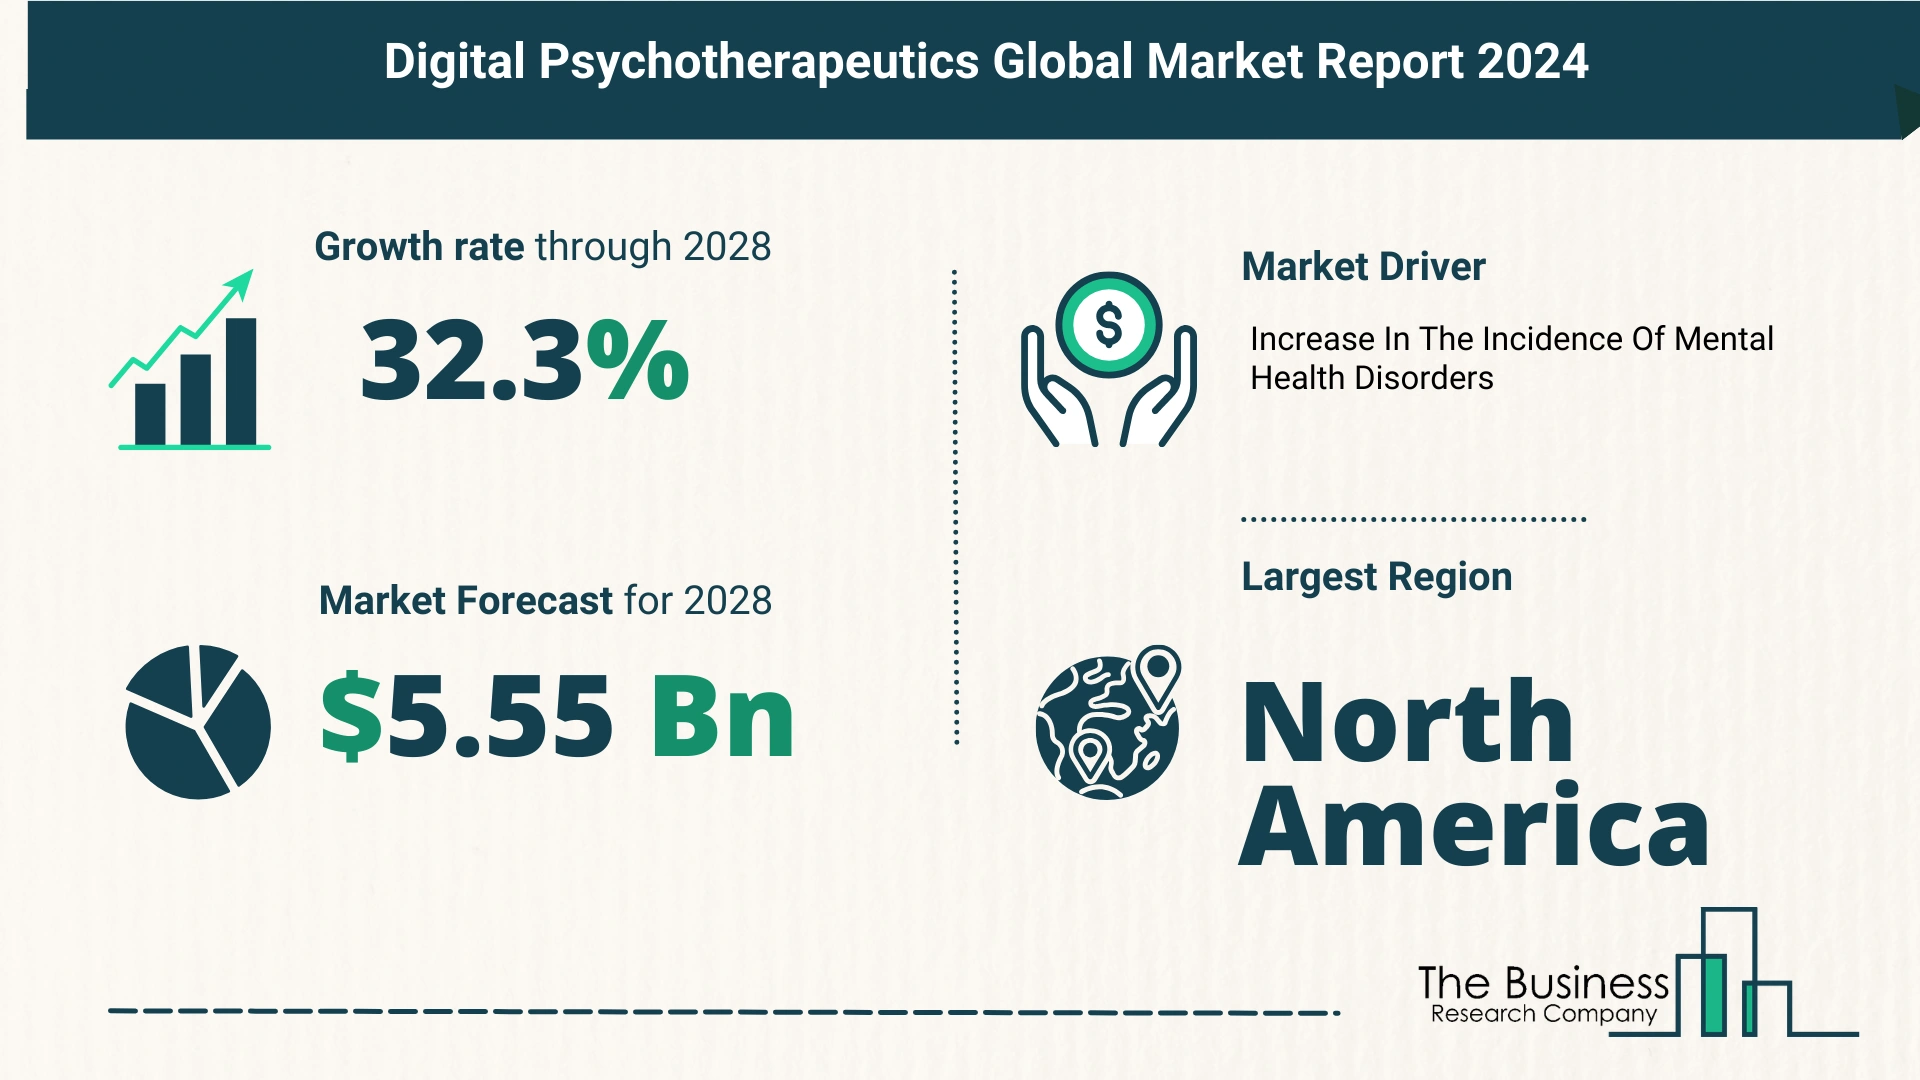 Key Insights On The Digital Psychotherapeutics Market 2024 – Size, Driver, And Major Players